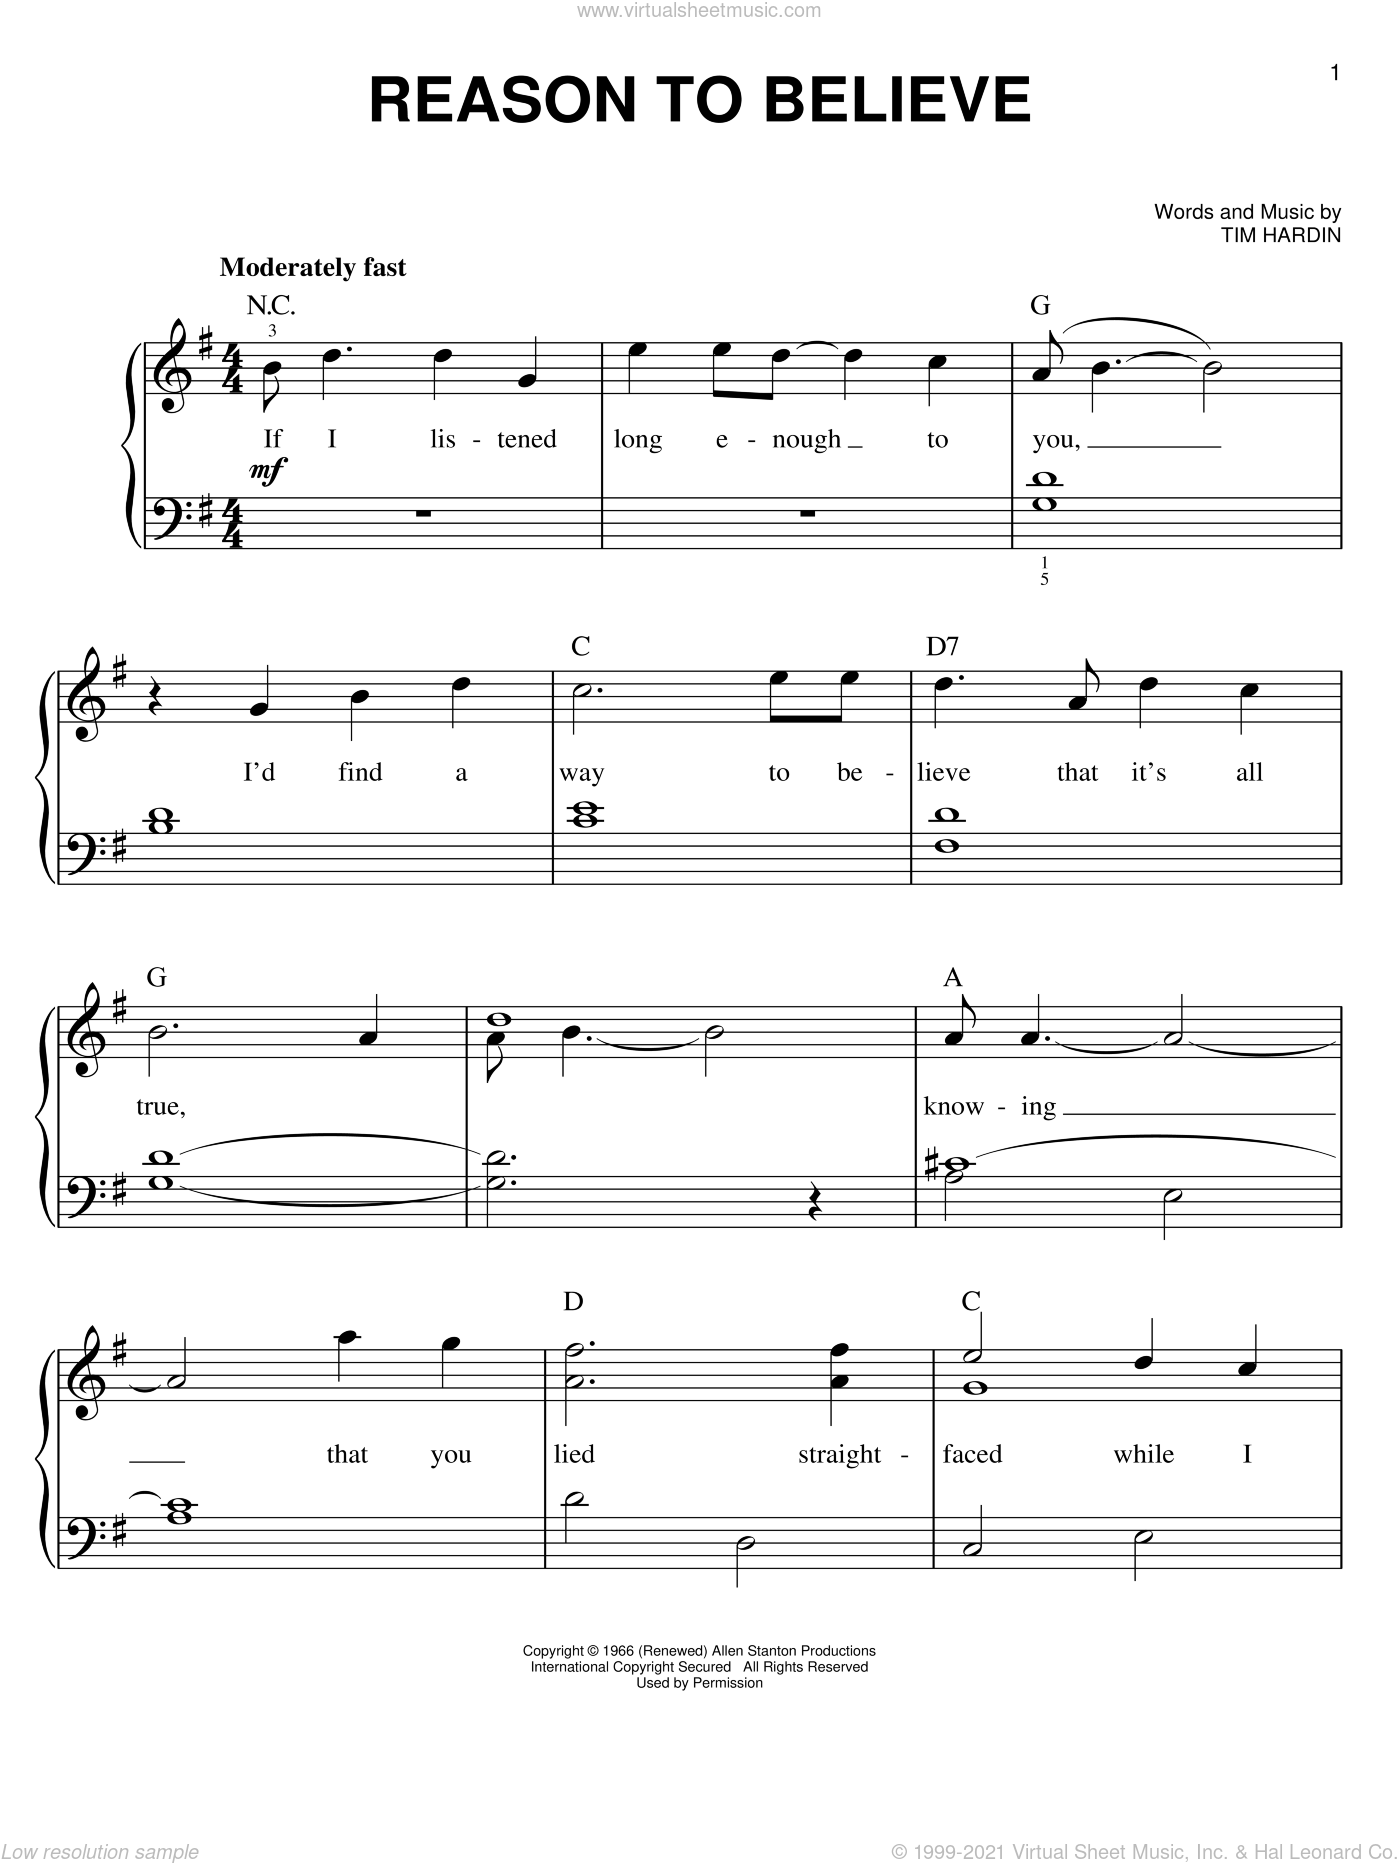 One Piece - Opening 2 - Believe Sheet music for Piano (Solo)